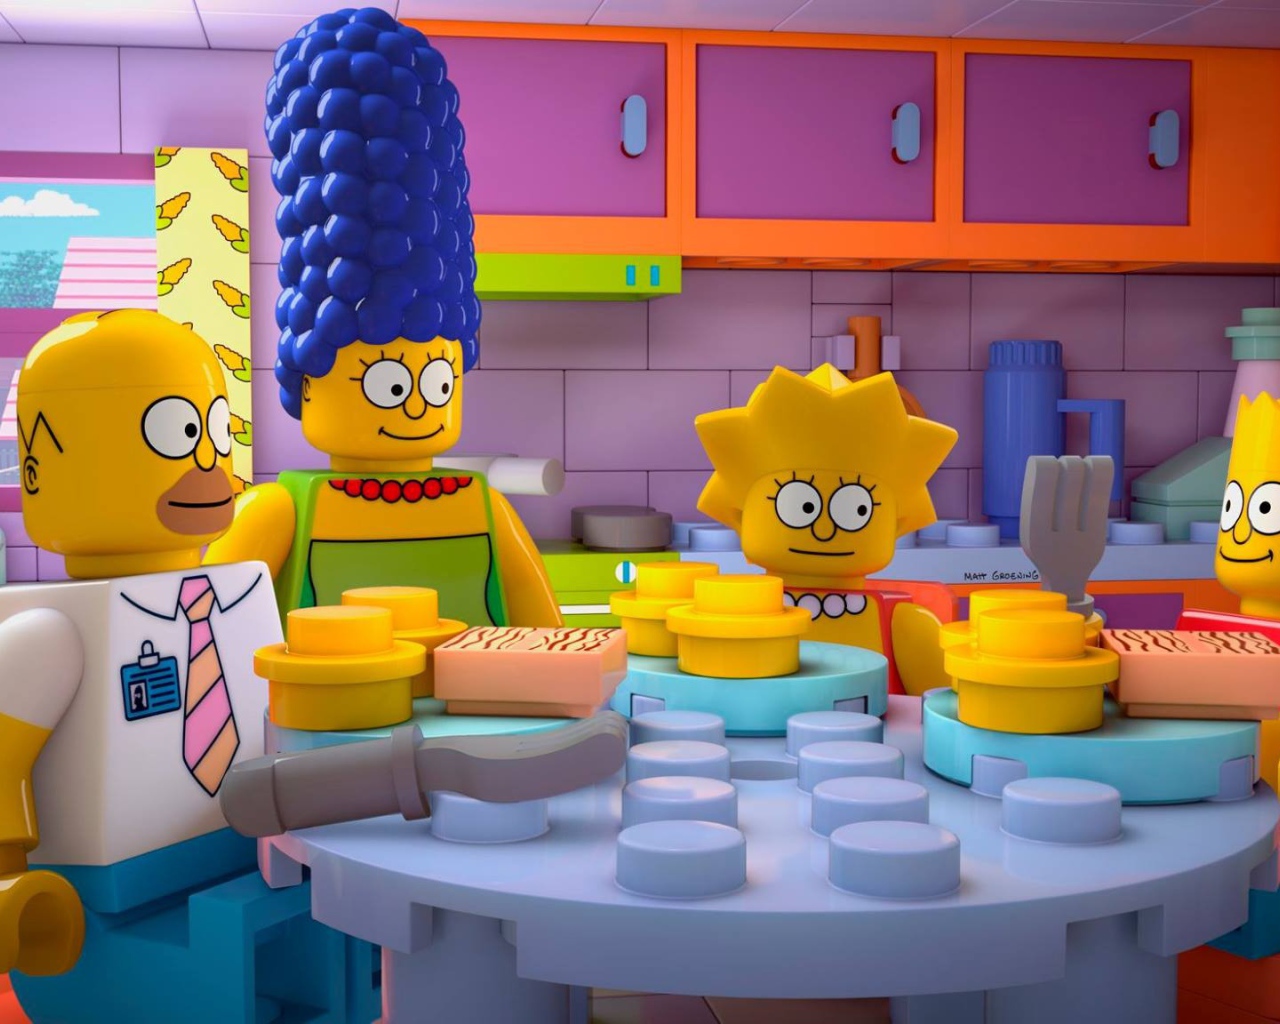 The Simpsons LEGO style